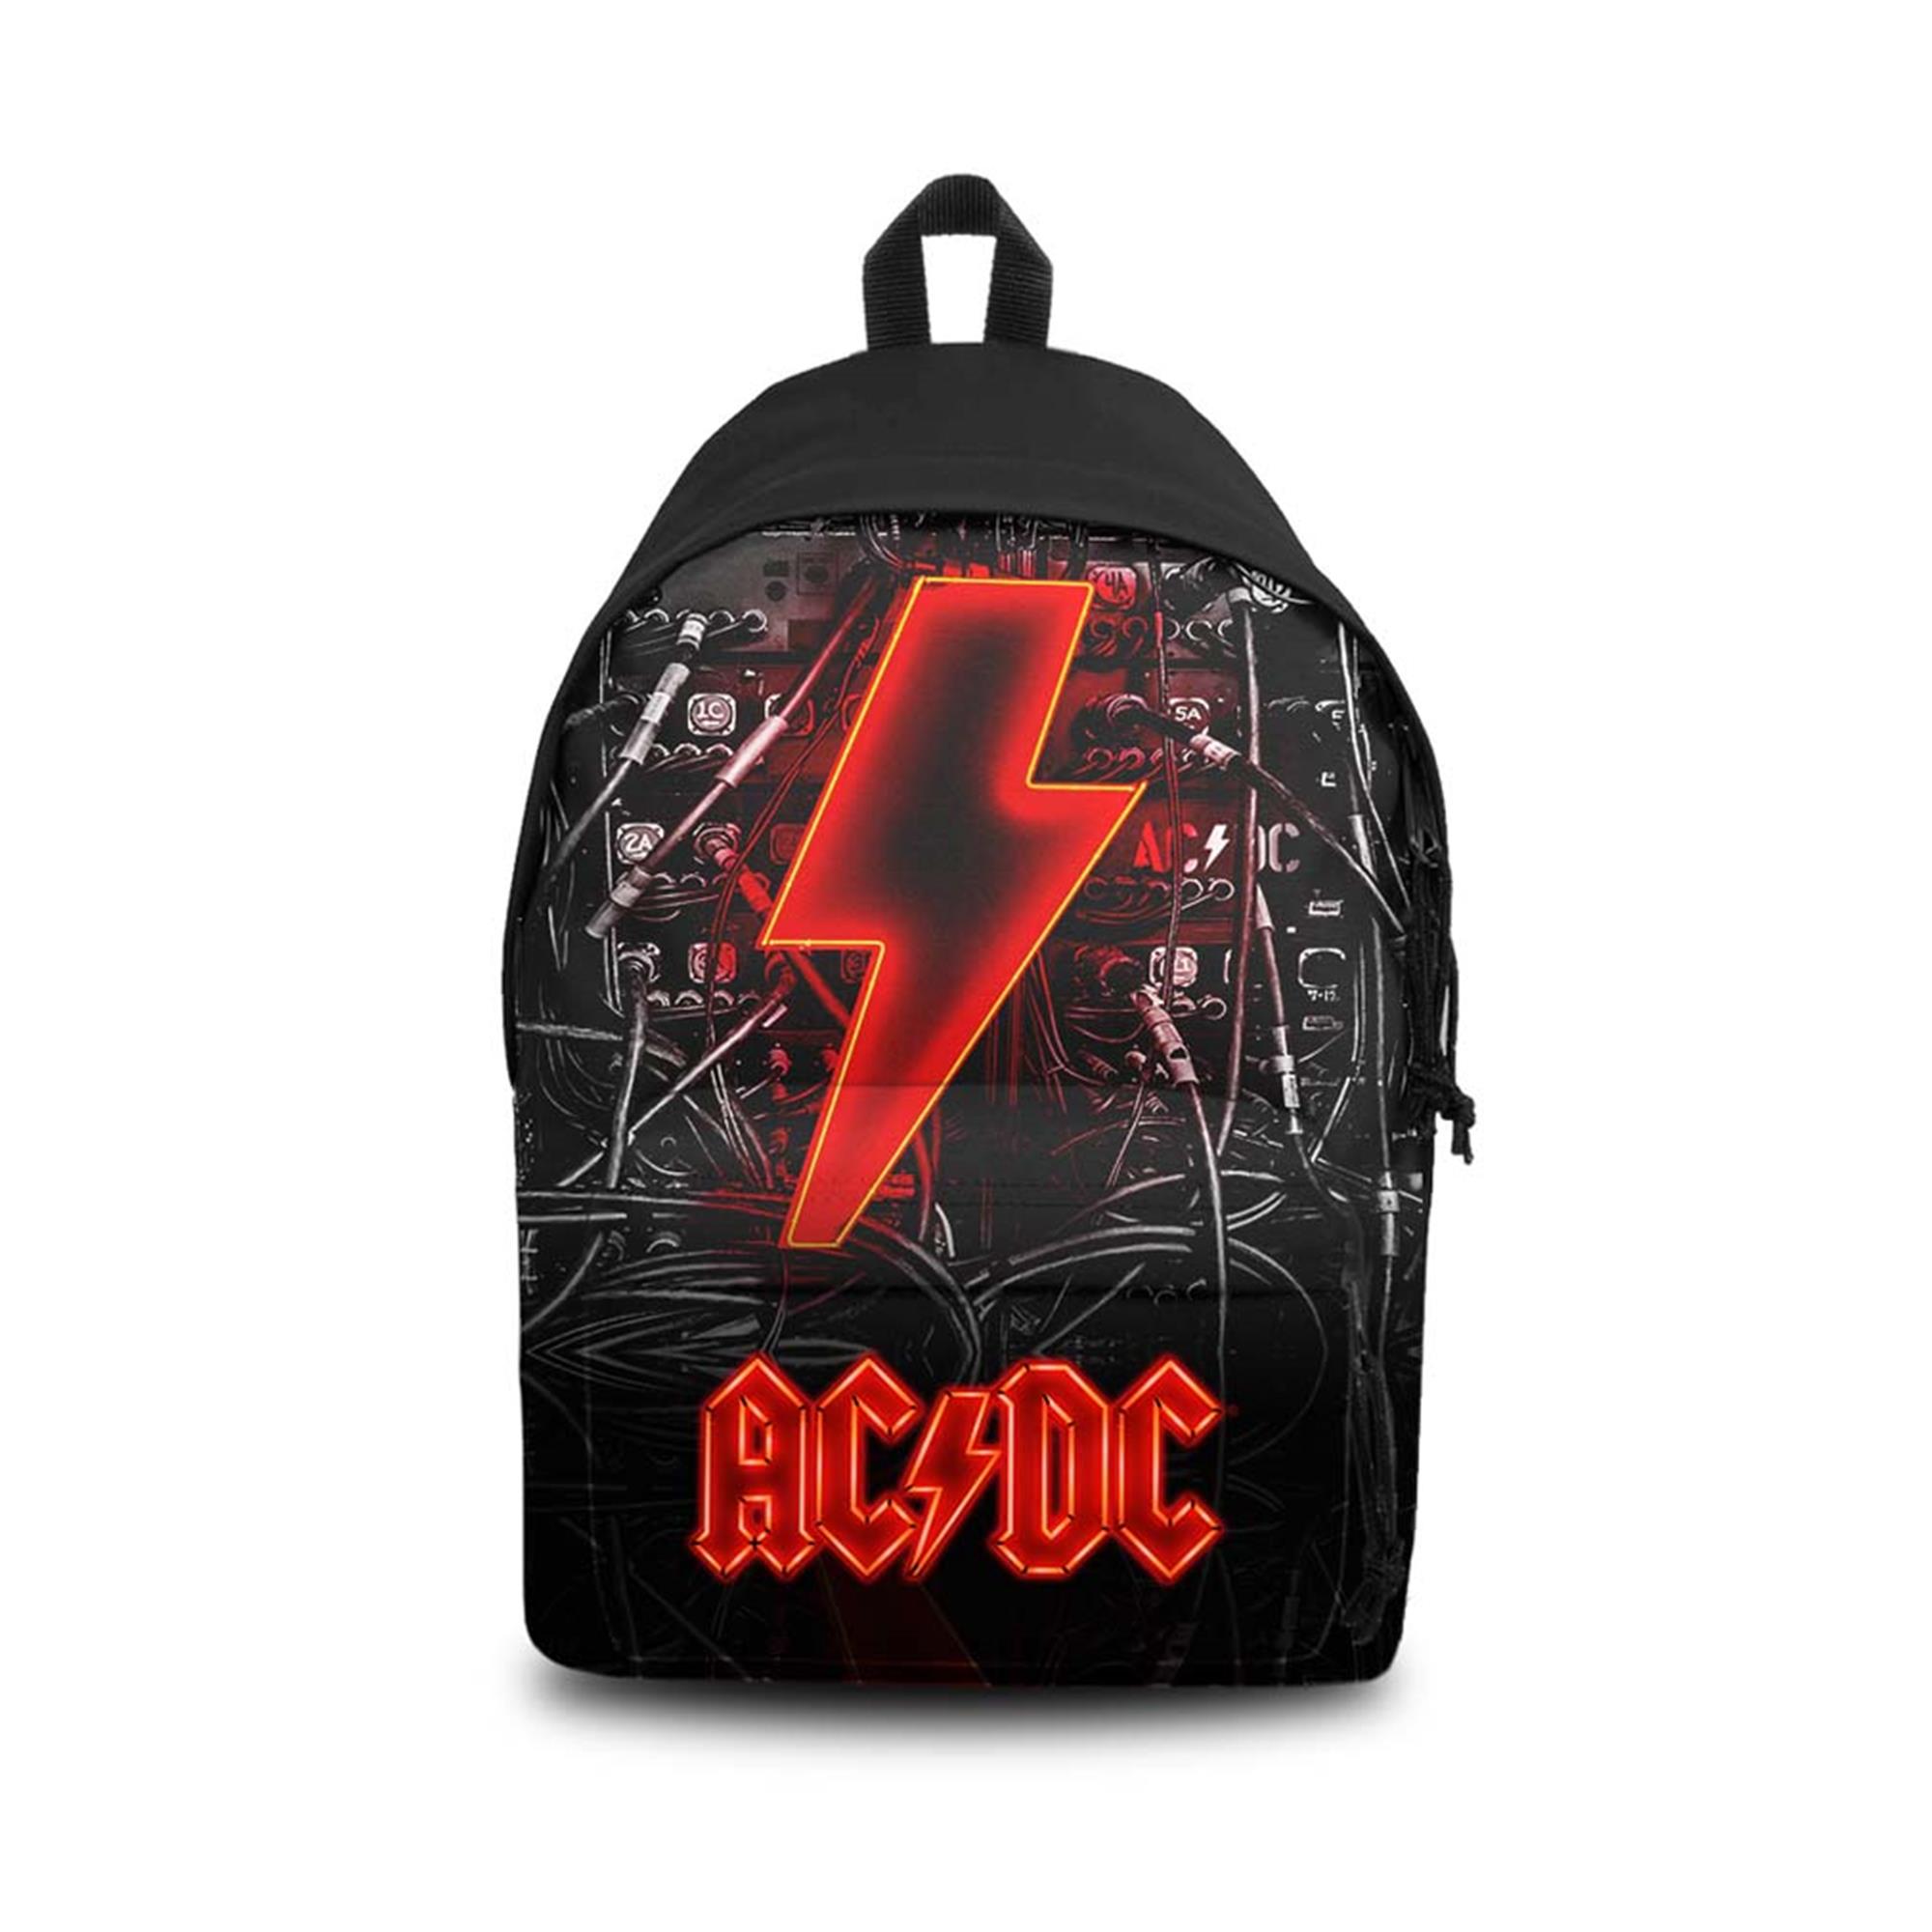 AC/DC Pwr Up 3 Daypack